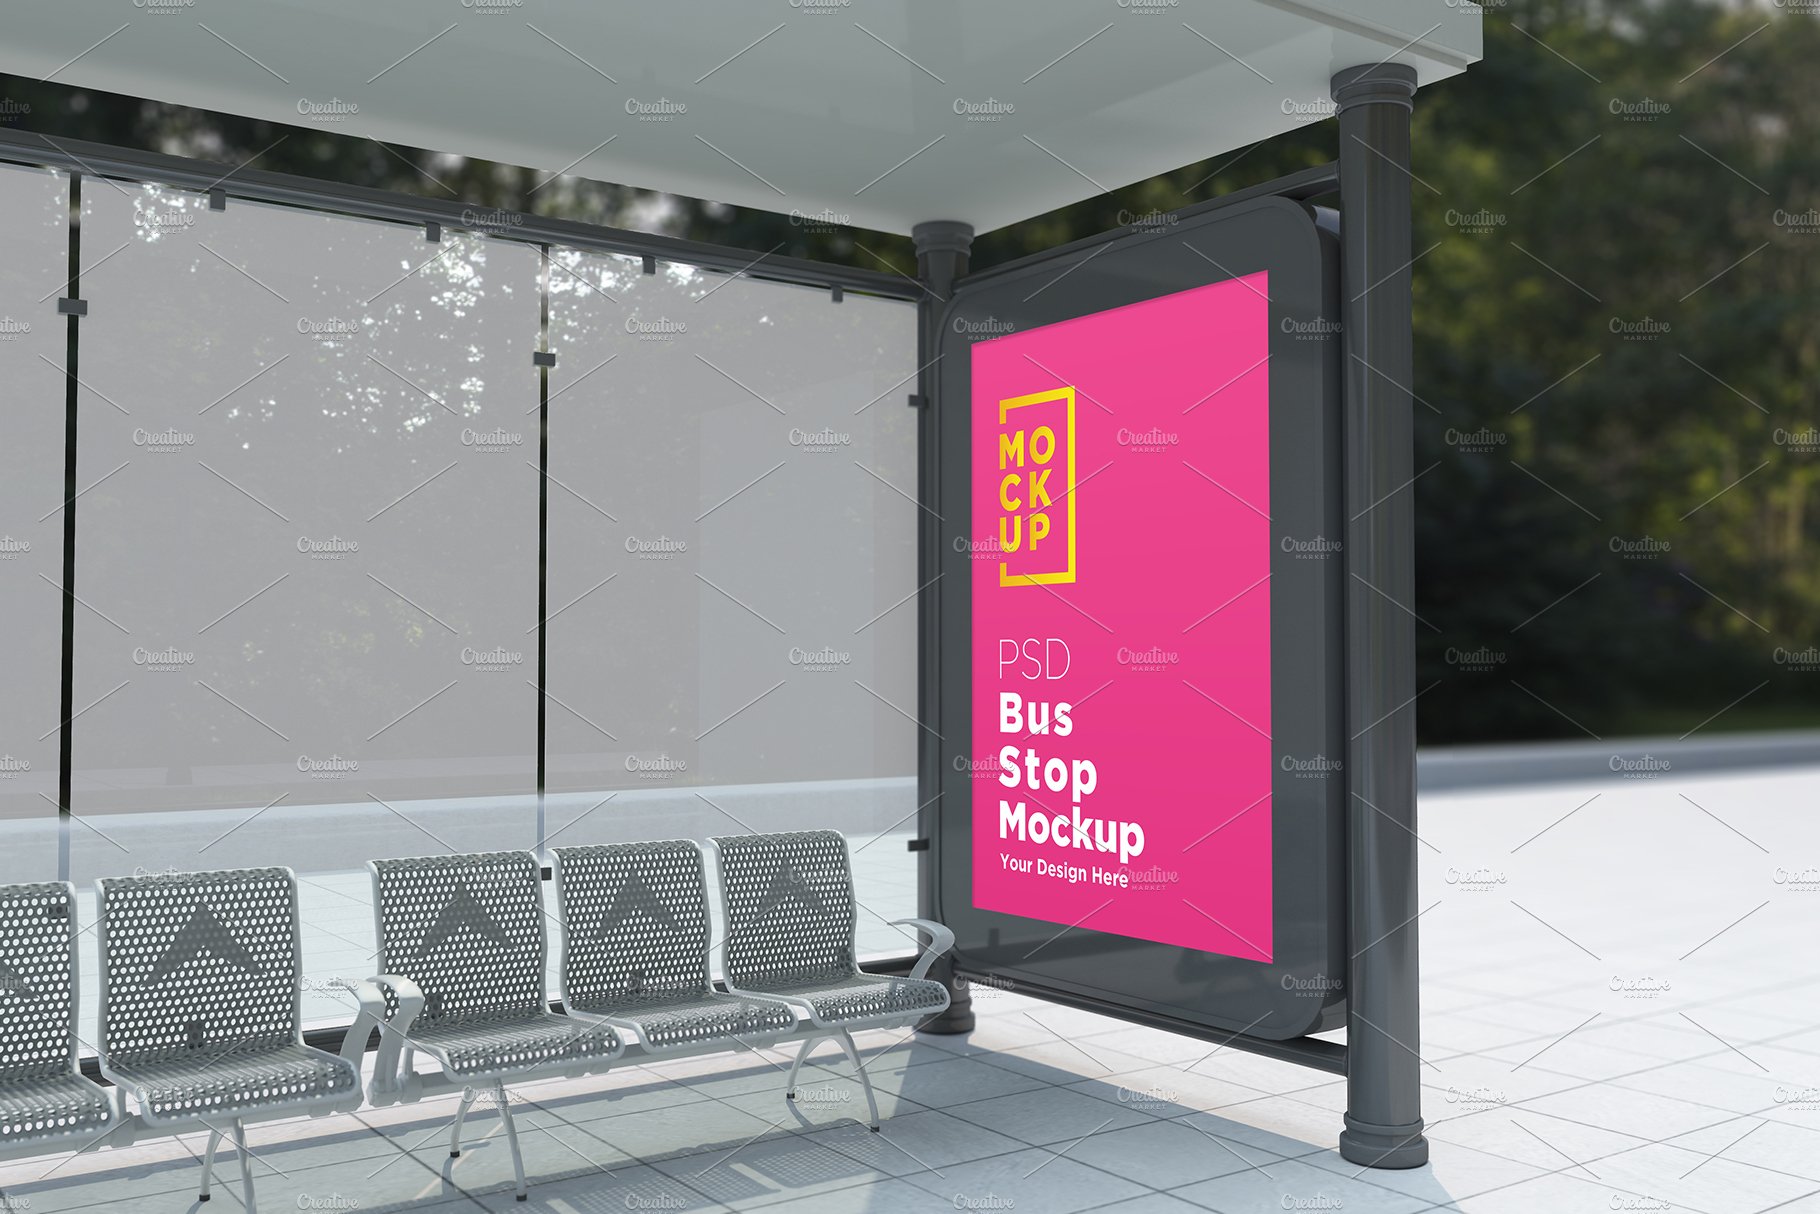 City Bus Stop Sign Mockup cover image.